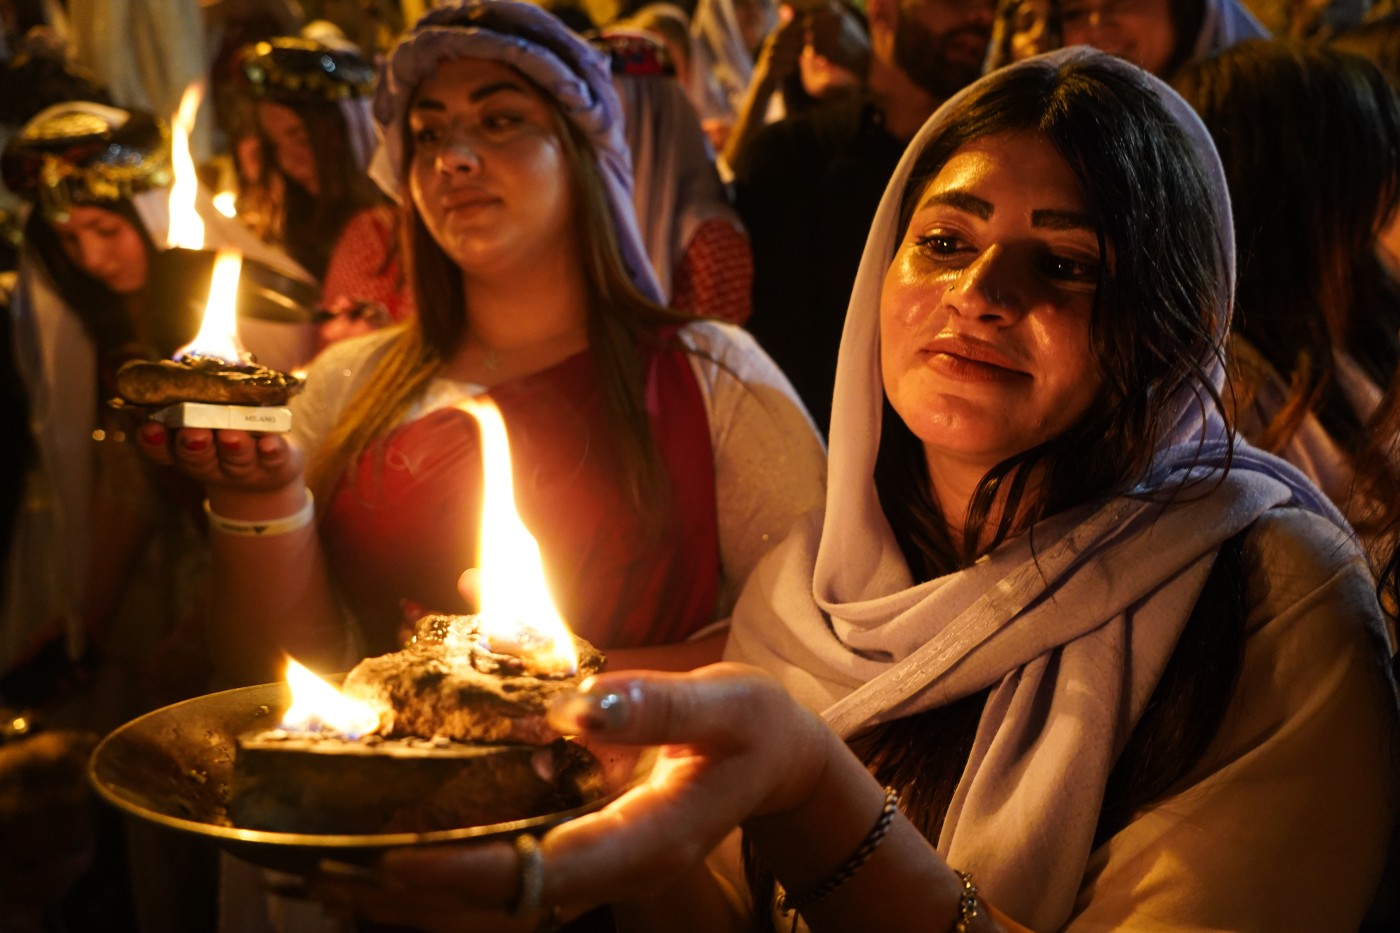 Iraqis Yazidis hold candles at Lalish Temple, in a valley near the northern city of Dohuk Image